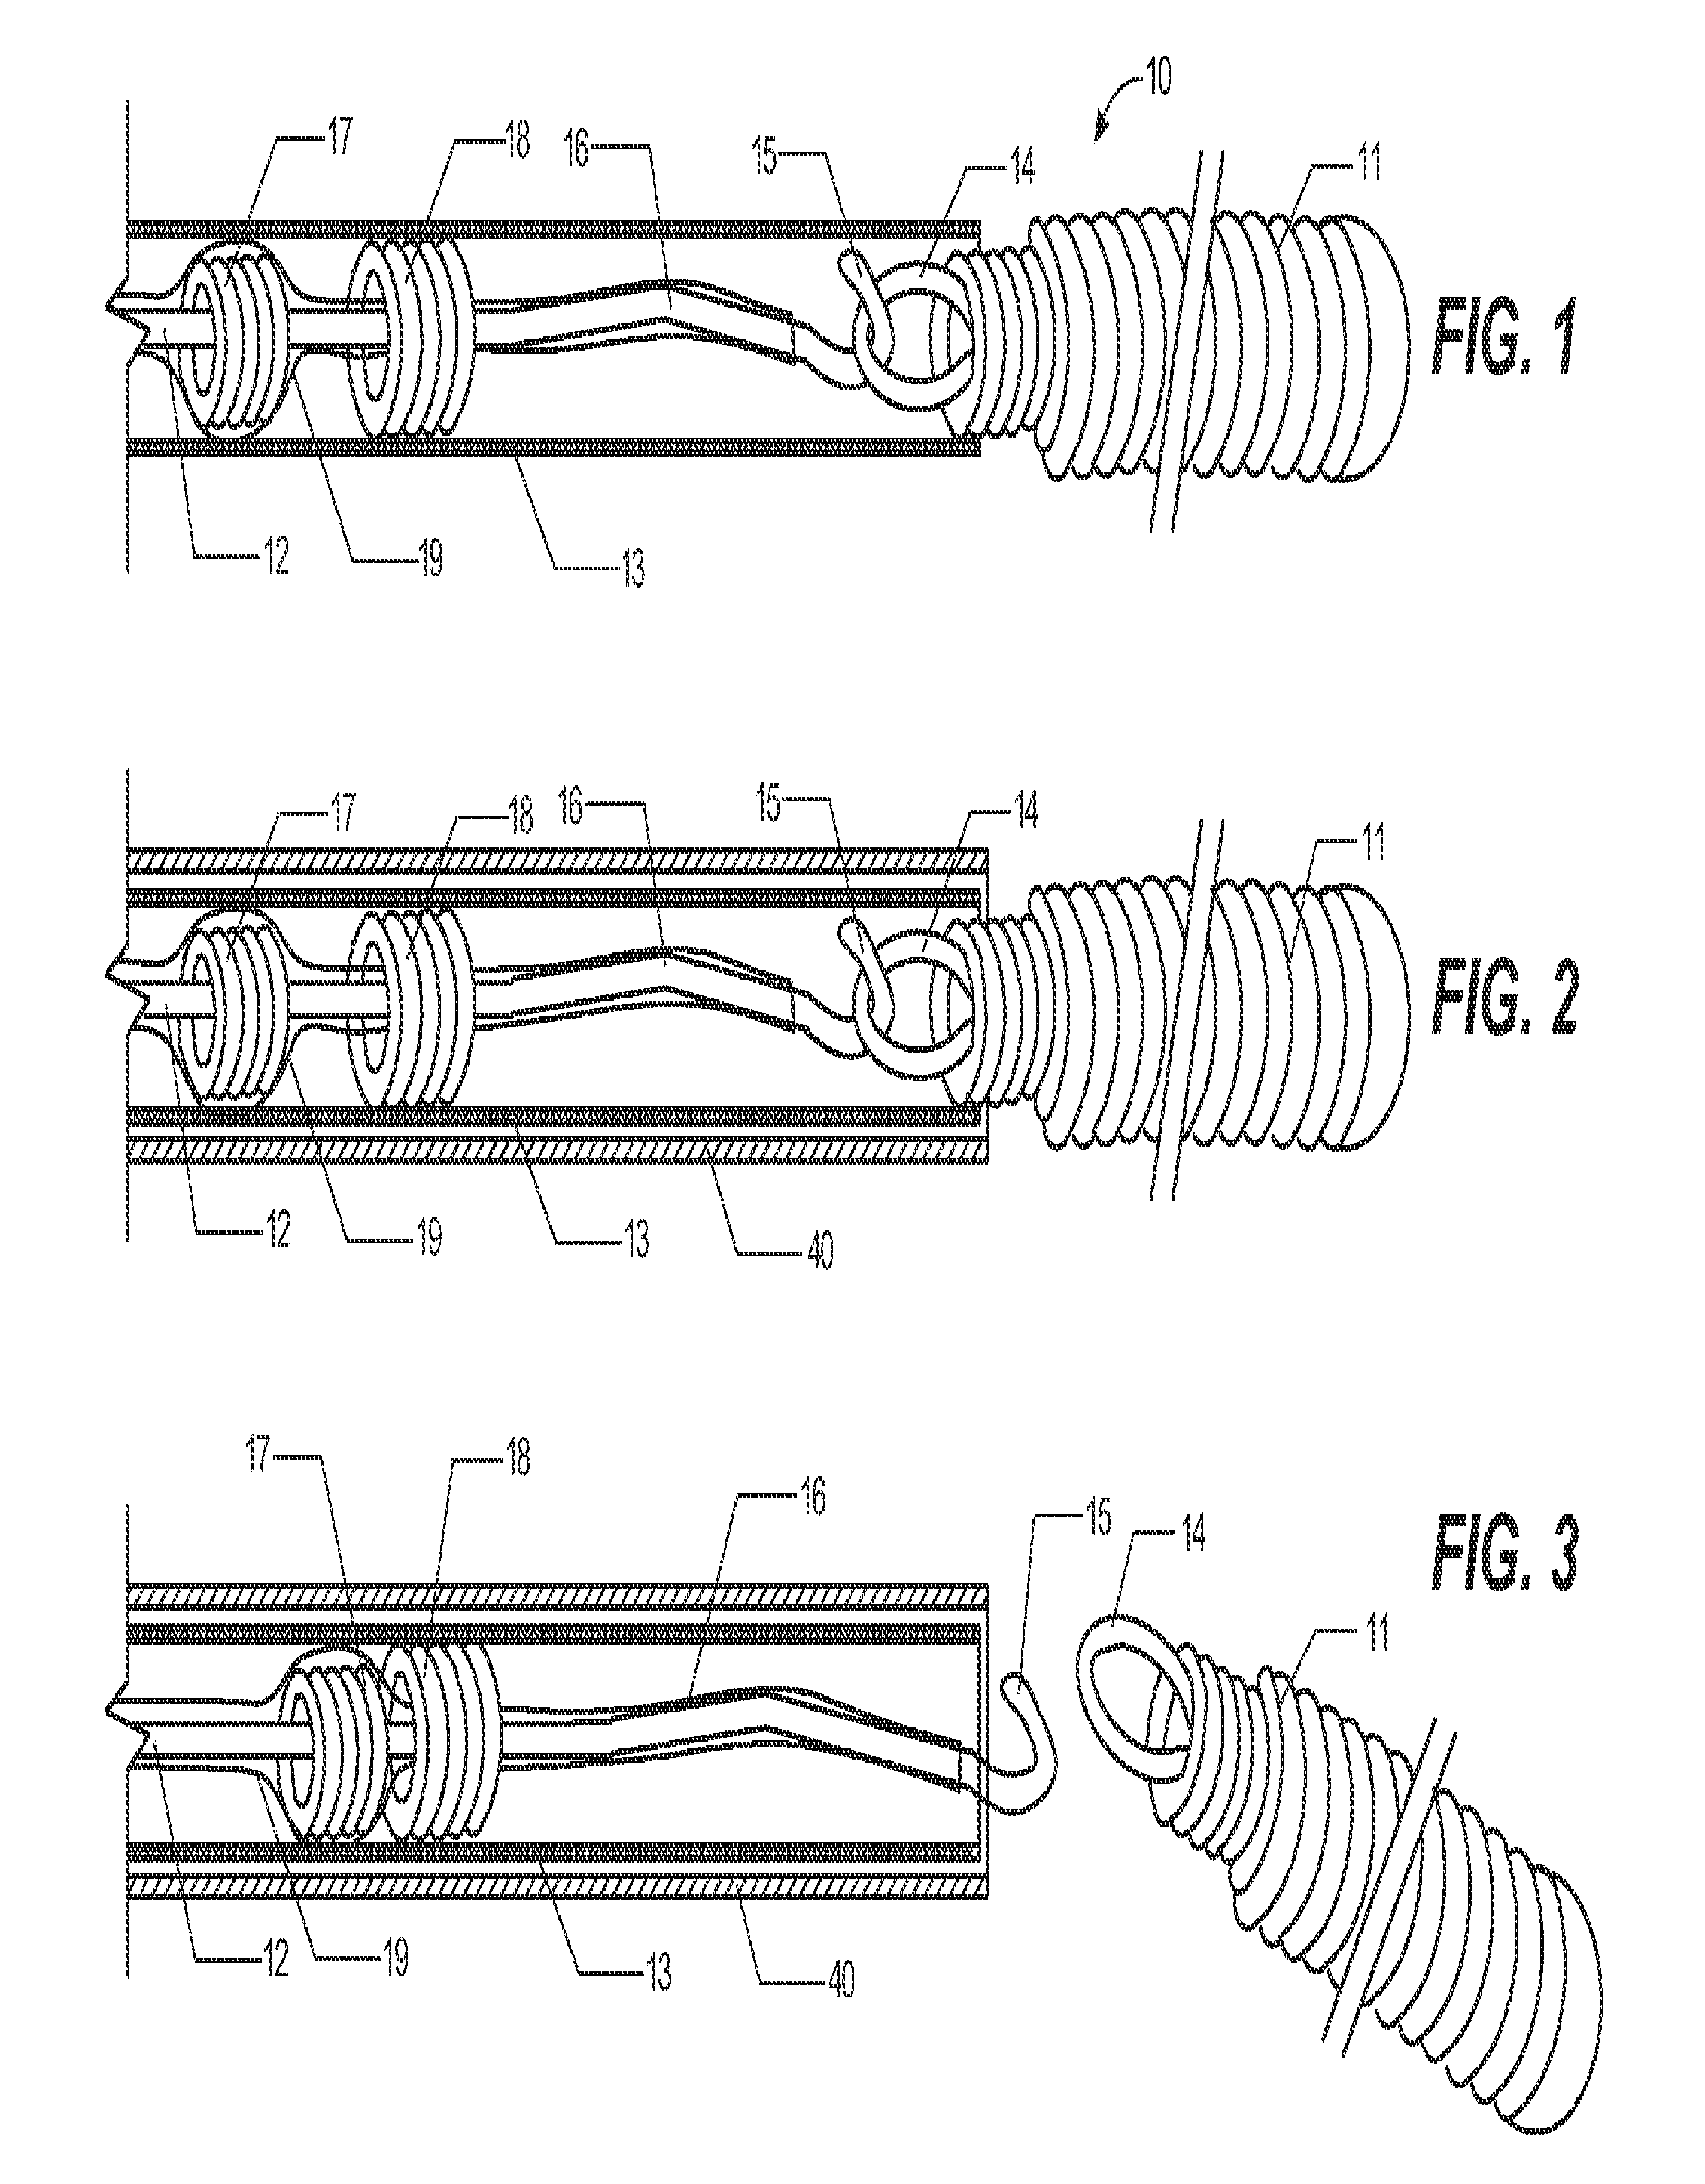 Delivery assembly for occlusion device using mechanical interlocking coupling mechanism